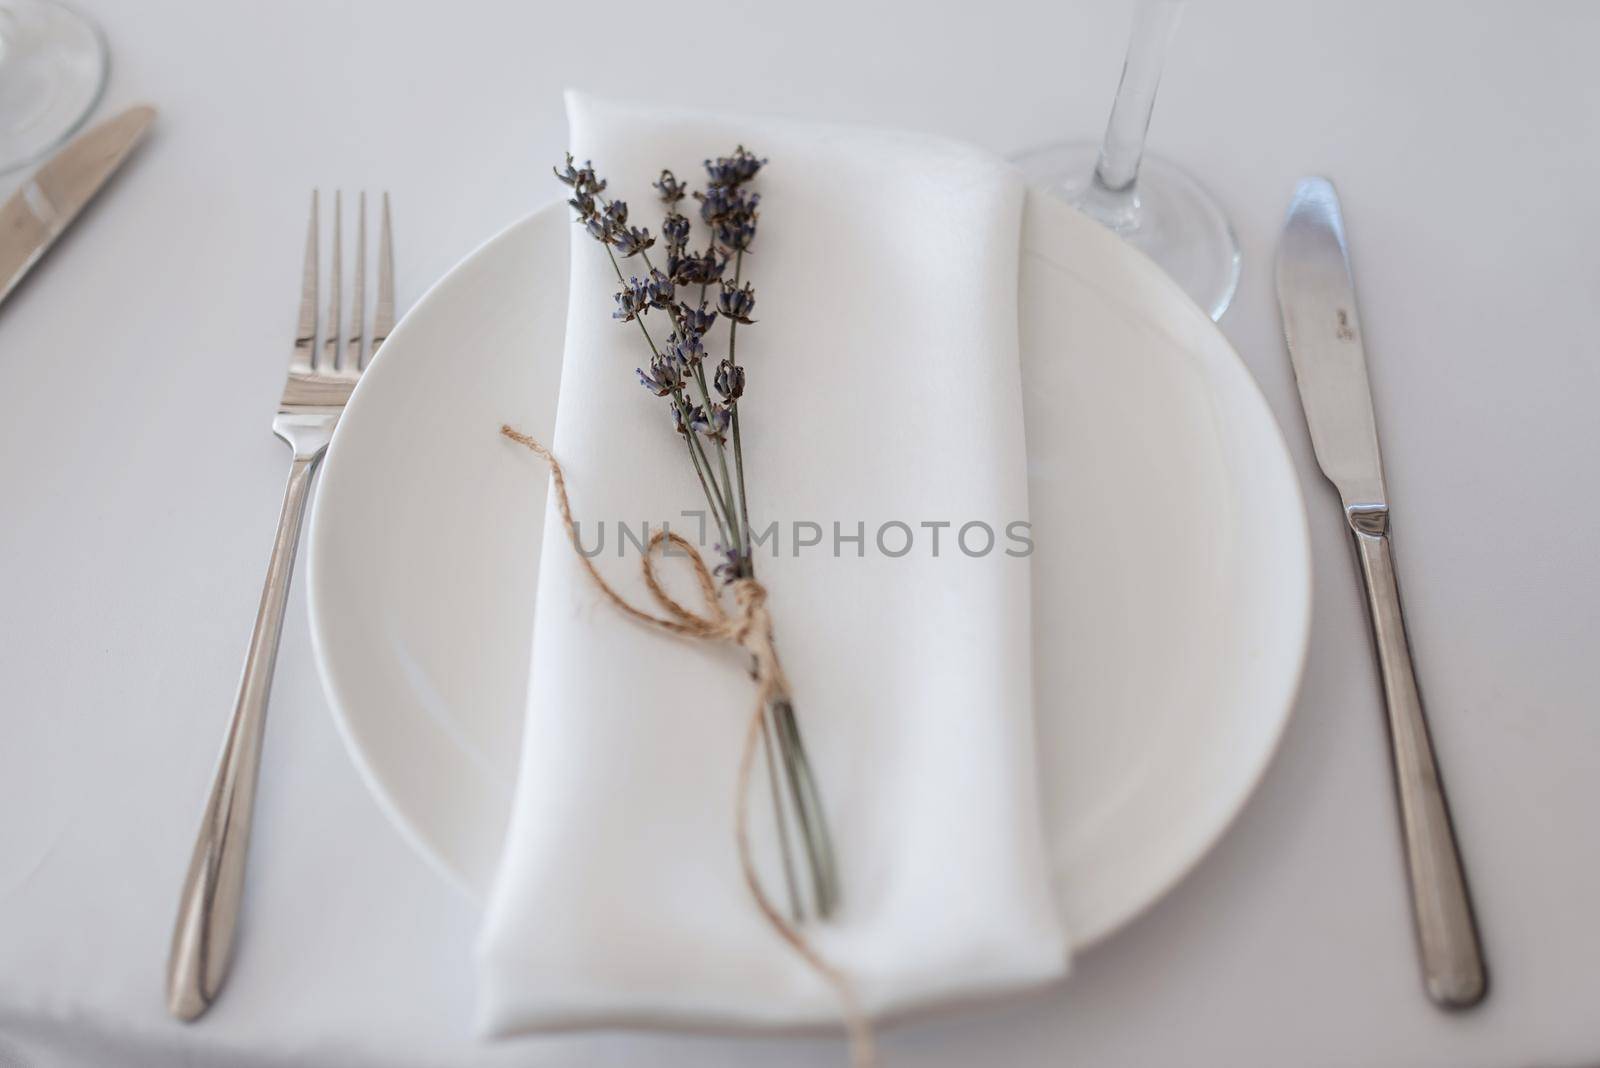 elegant wedding plate decorations made of natural flowers by Andreua